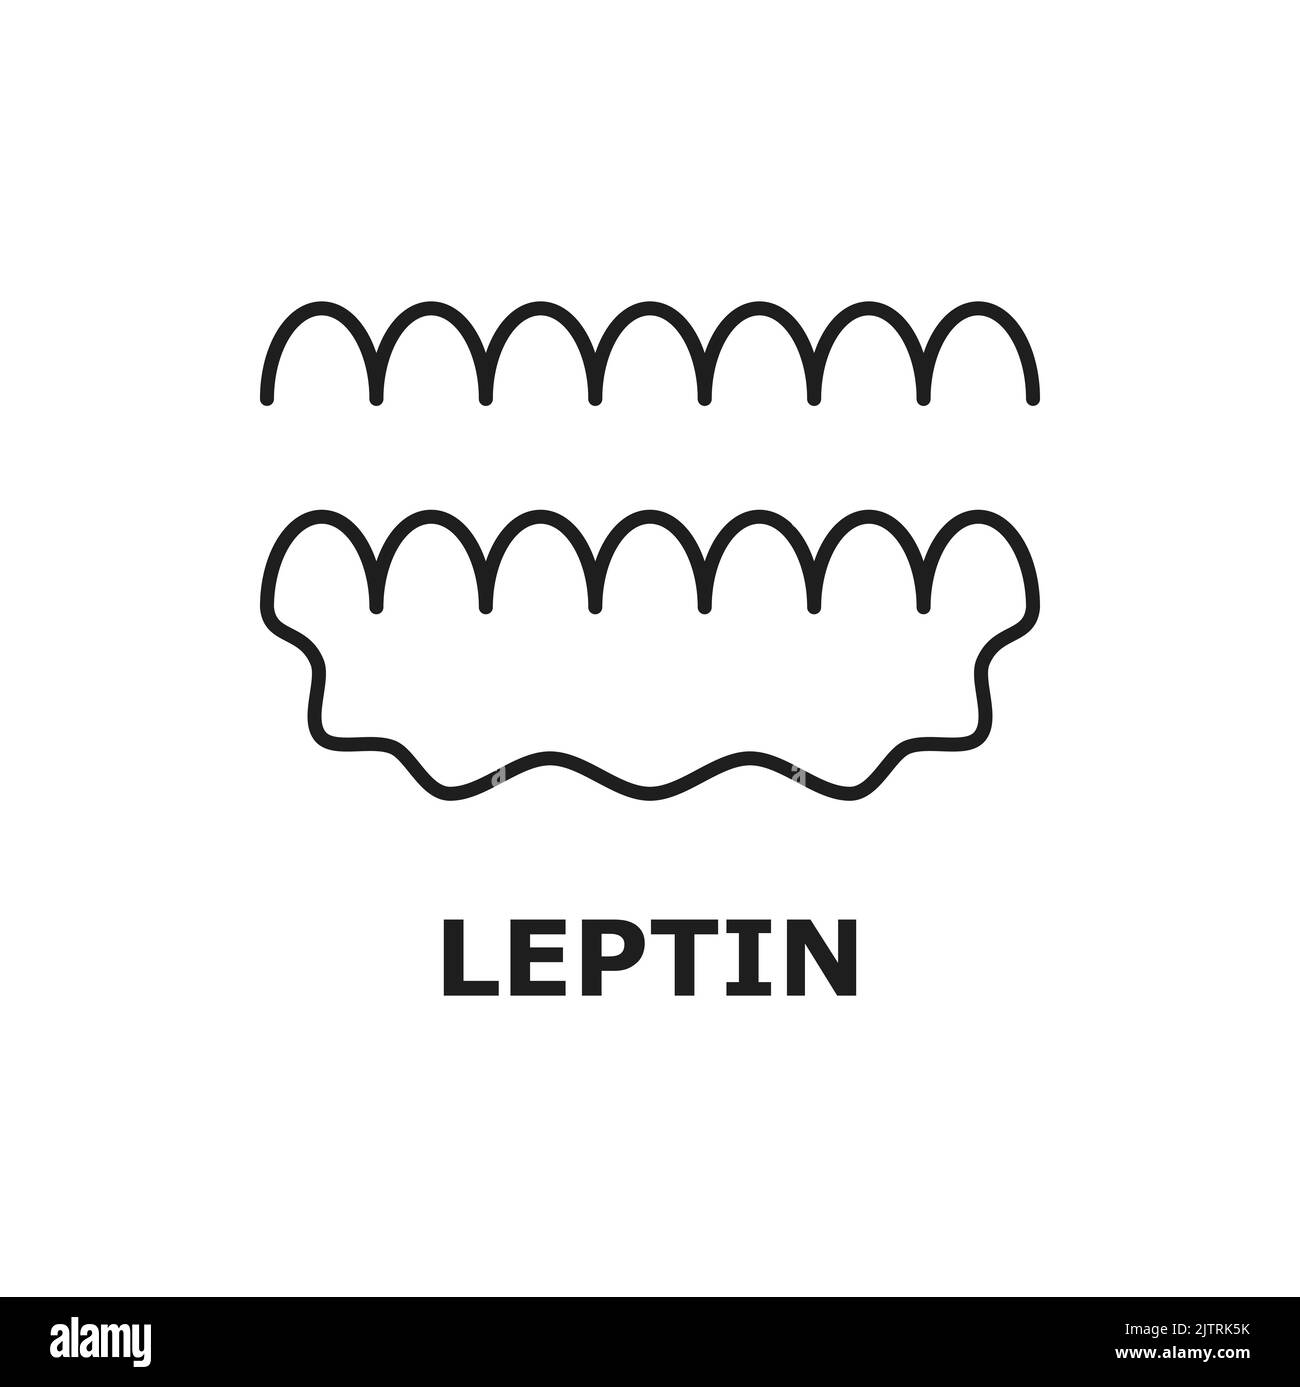 Leptin formula isolated peptide hormone chemical structure thin line icon. Vector symbol for biology, chemistry, naturopathy, medicine. Adipose cells Stock Vector